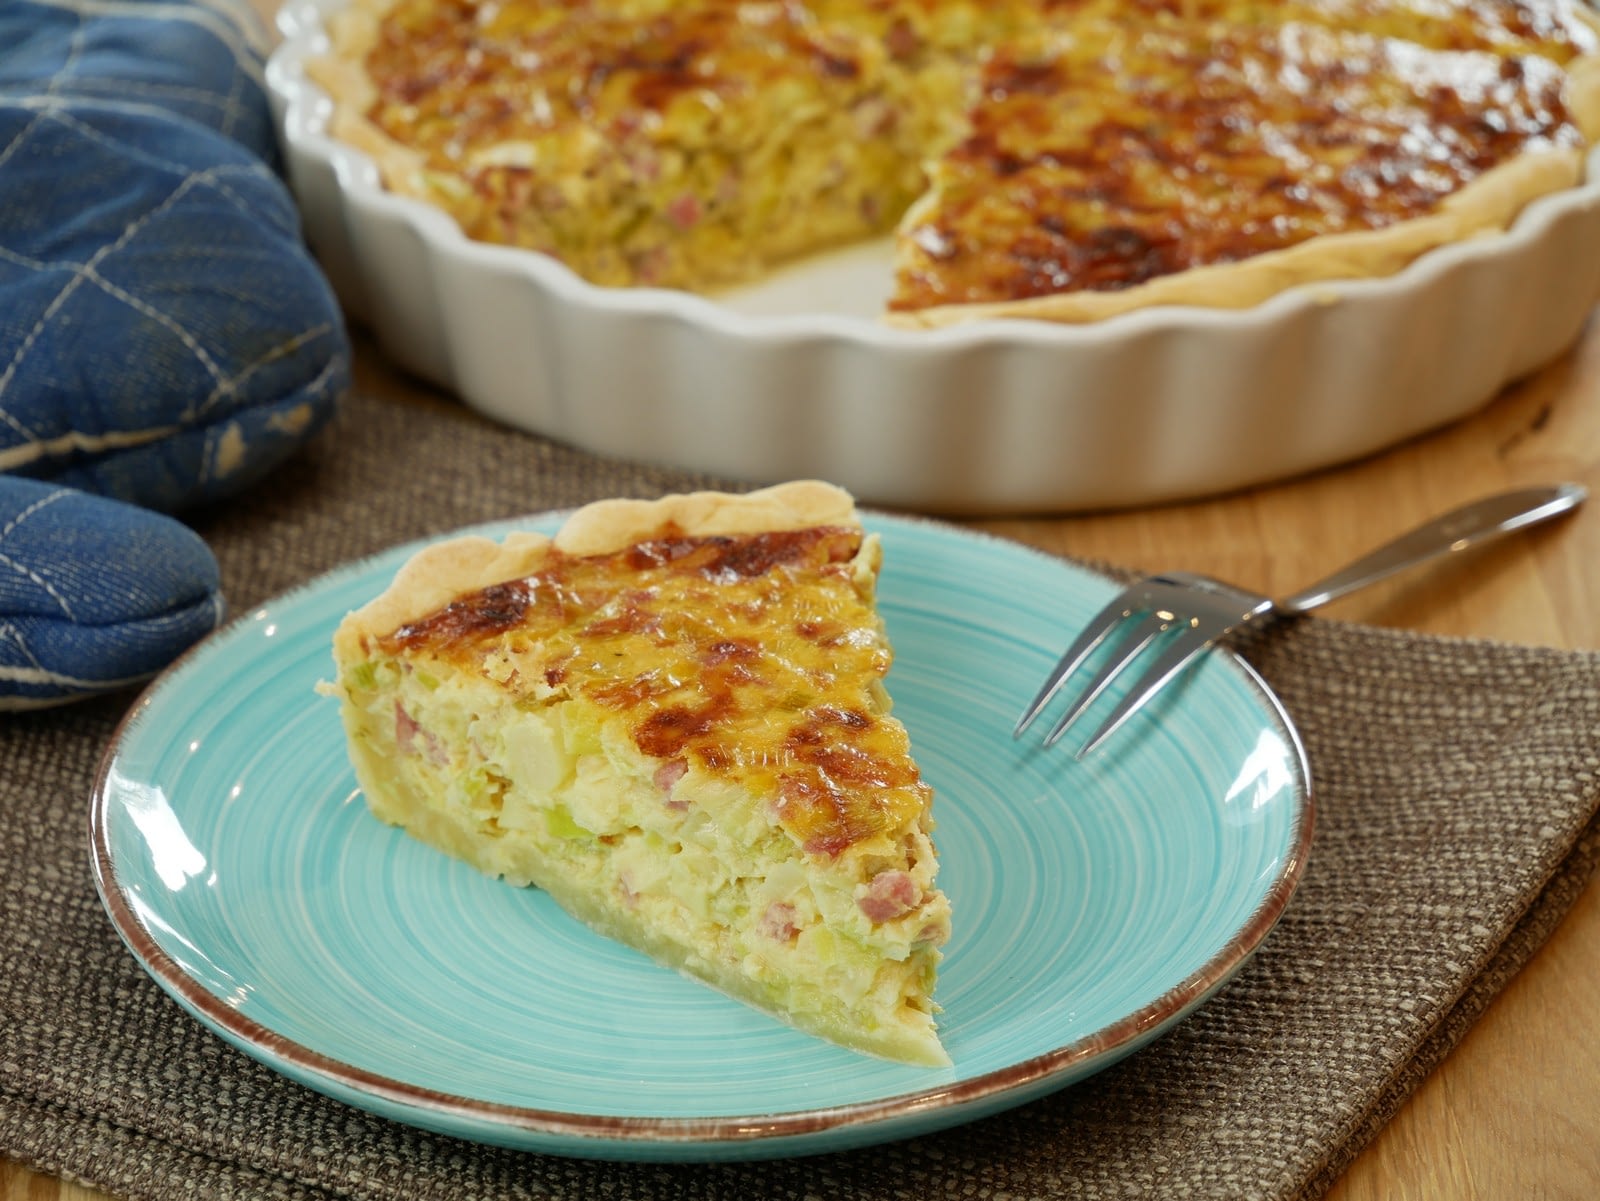 Lauch Schinken Quiche - kinds of food from various countries